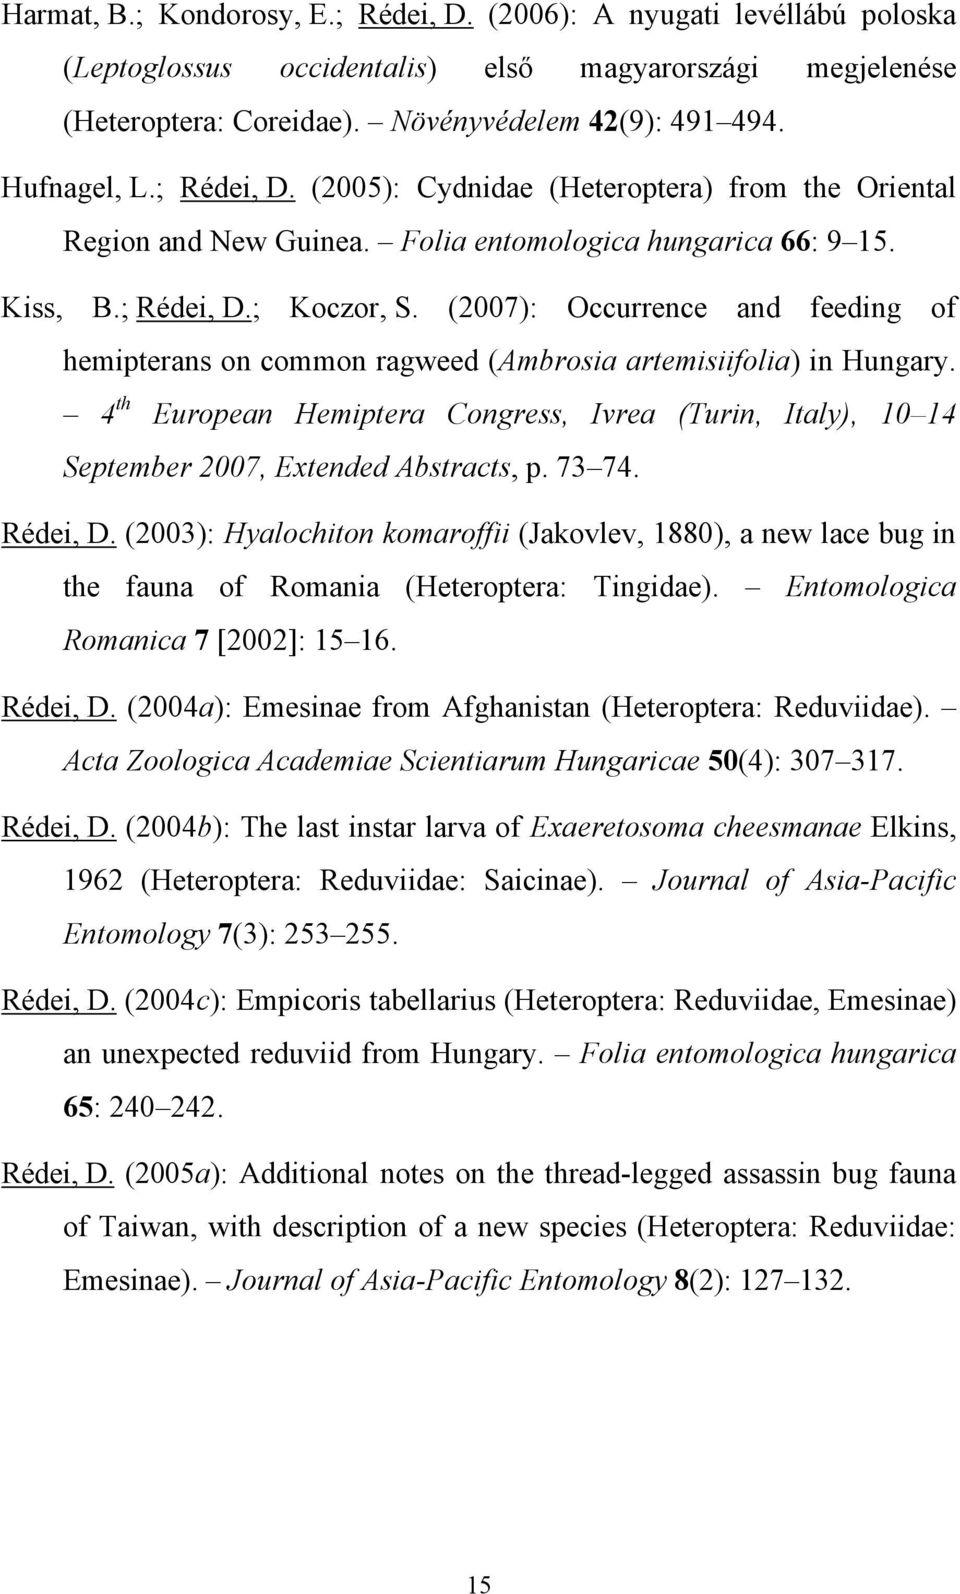 (2007): Occurrence and feeding of hemipterans on common ragweed (Ambrosia artemisiifolia) in Hungary.